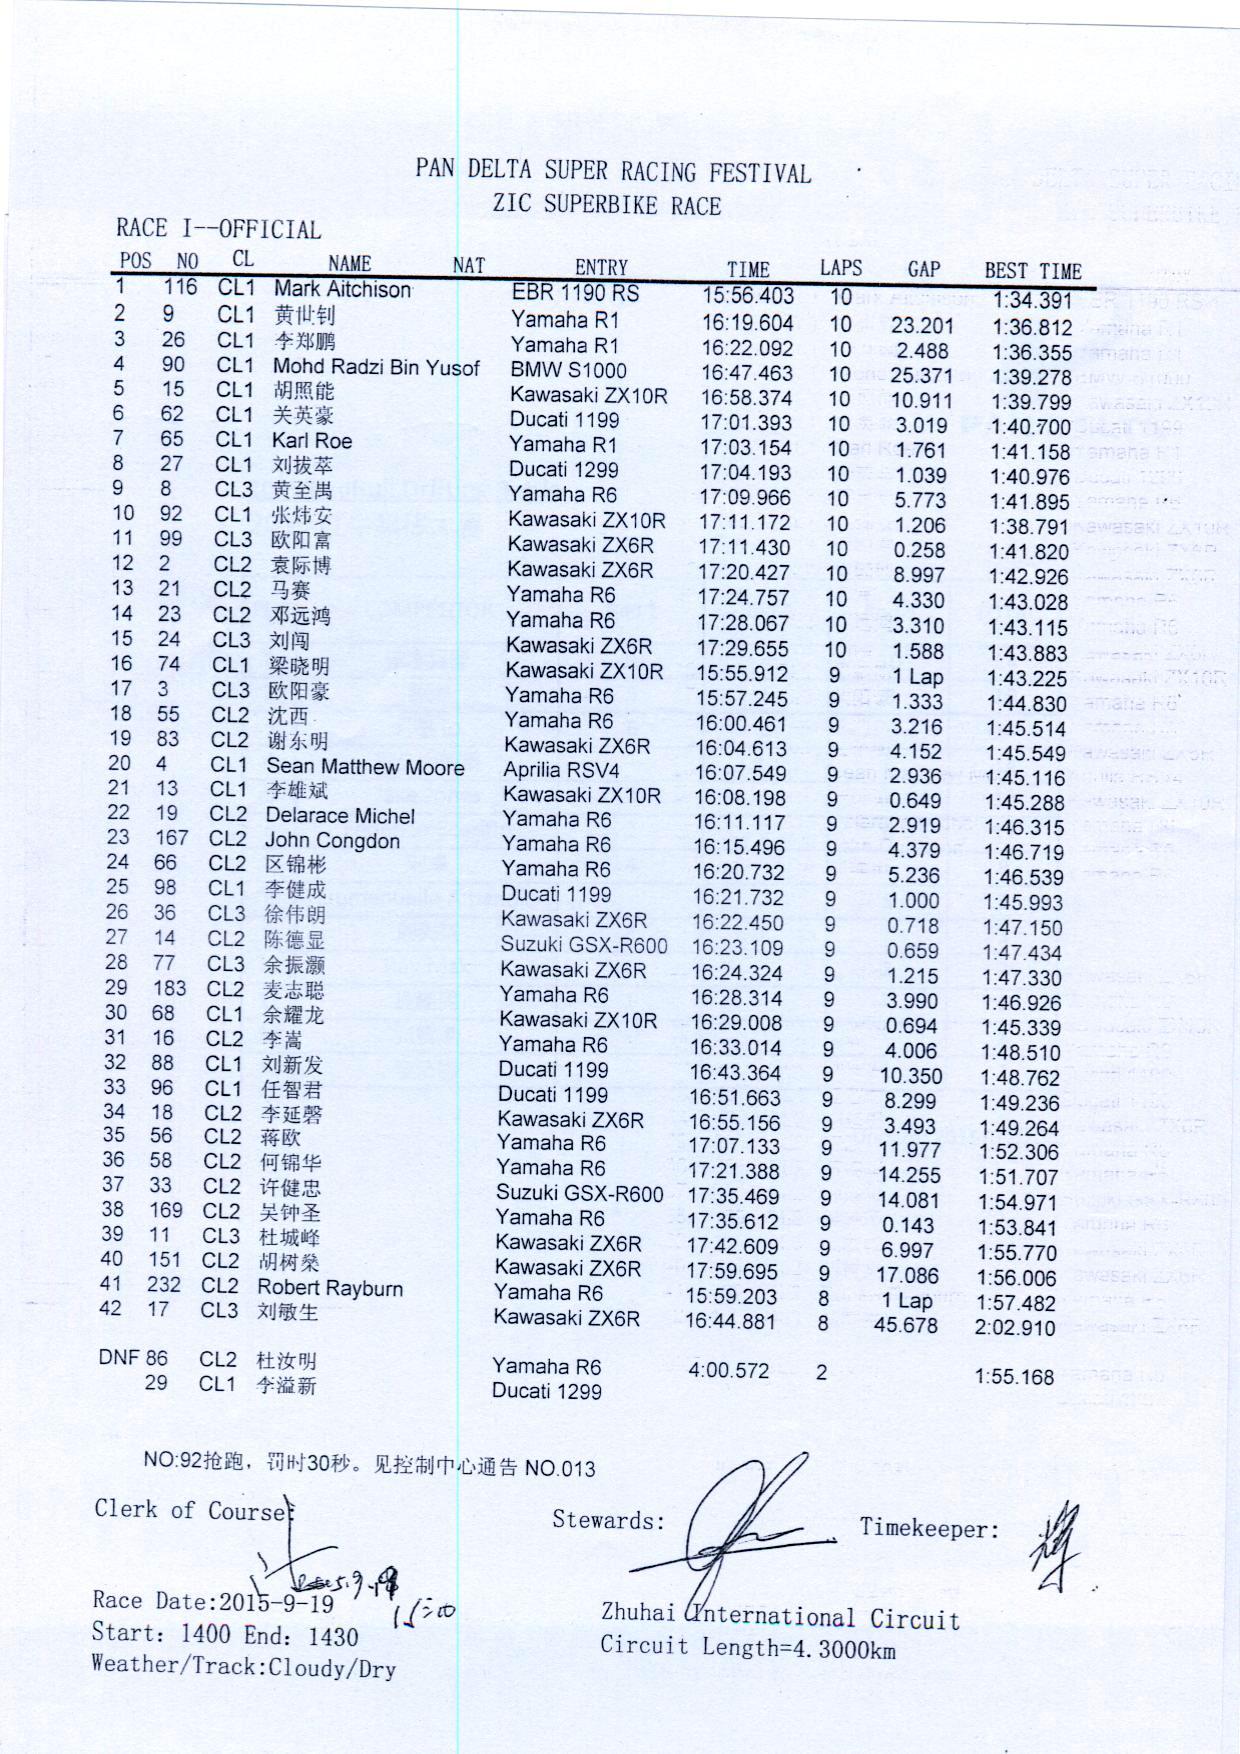 2015 PD3 ZIC Superbike Race 1 Results